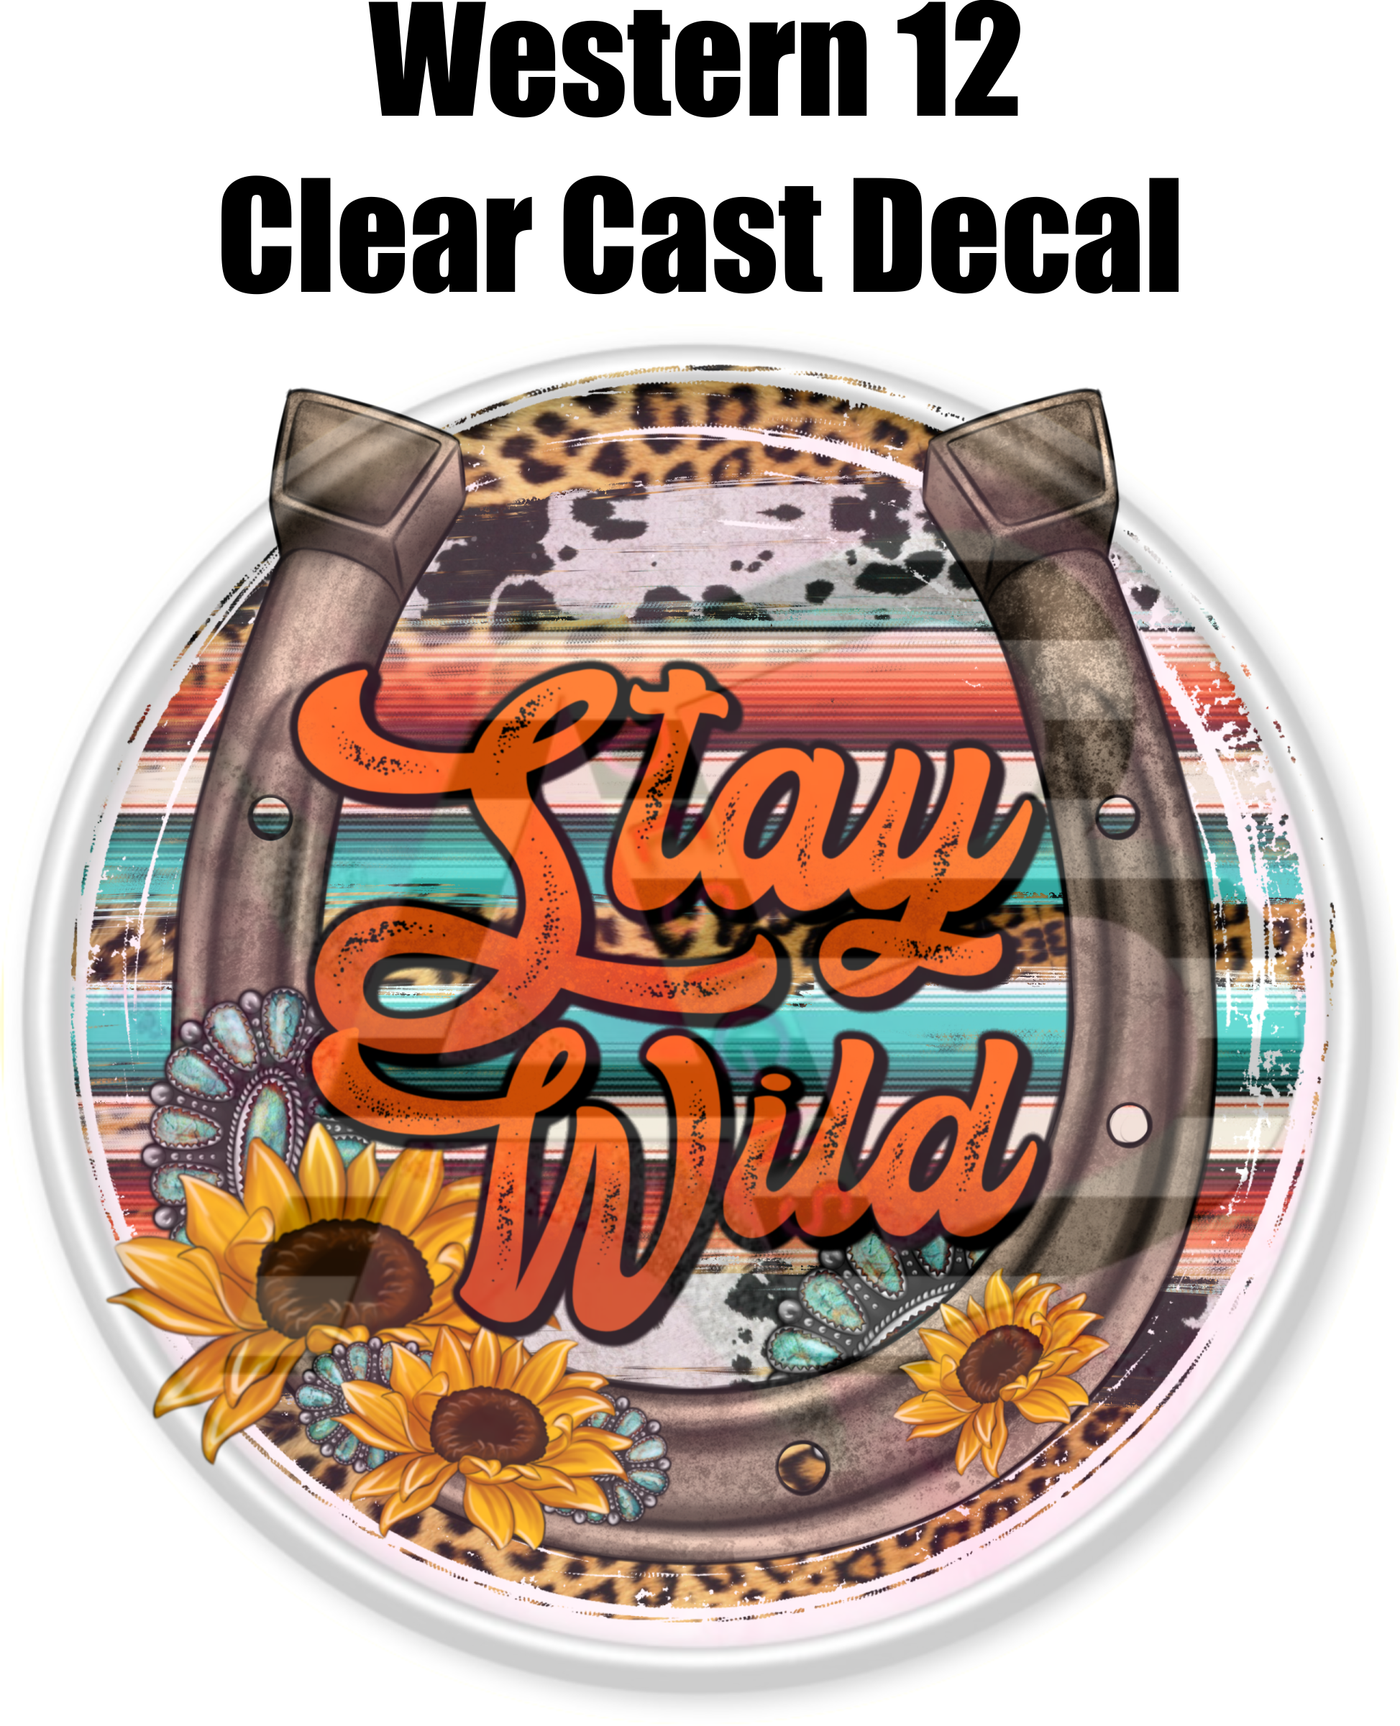 Western 12 - Clear Cast Decal